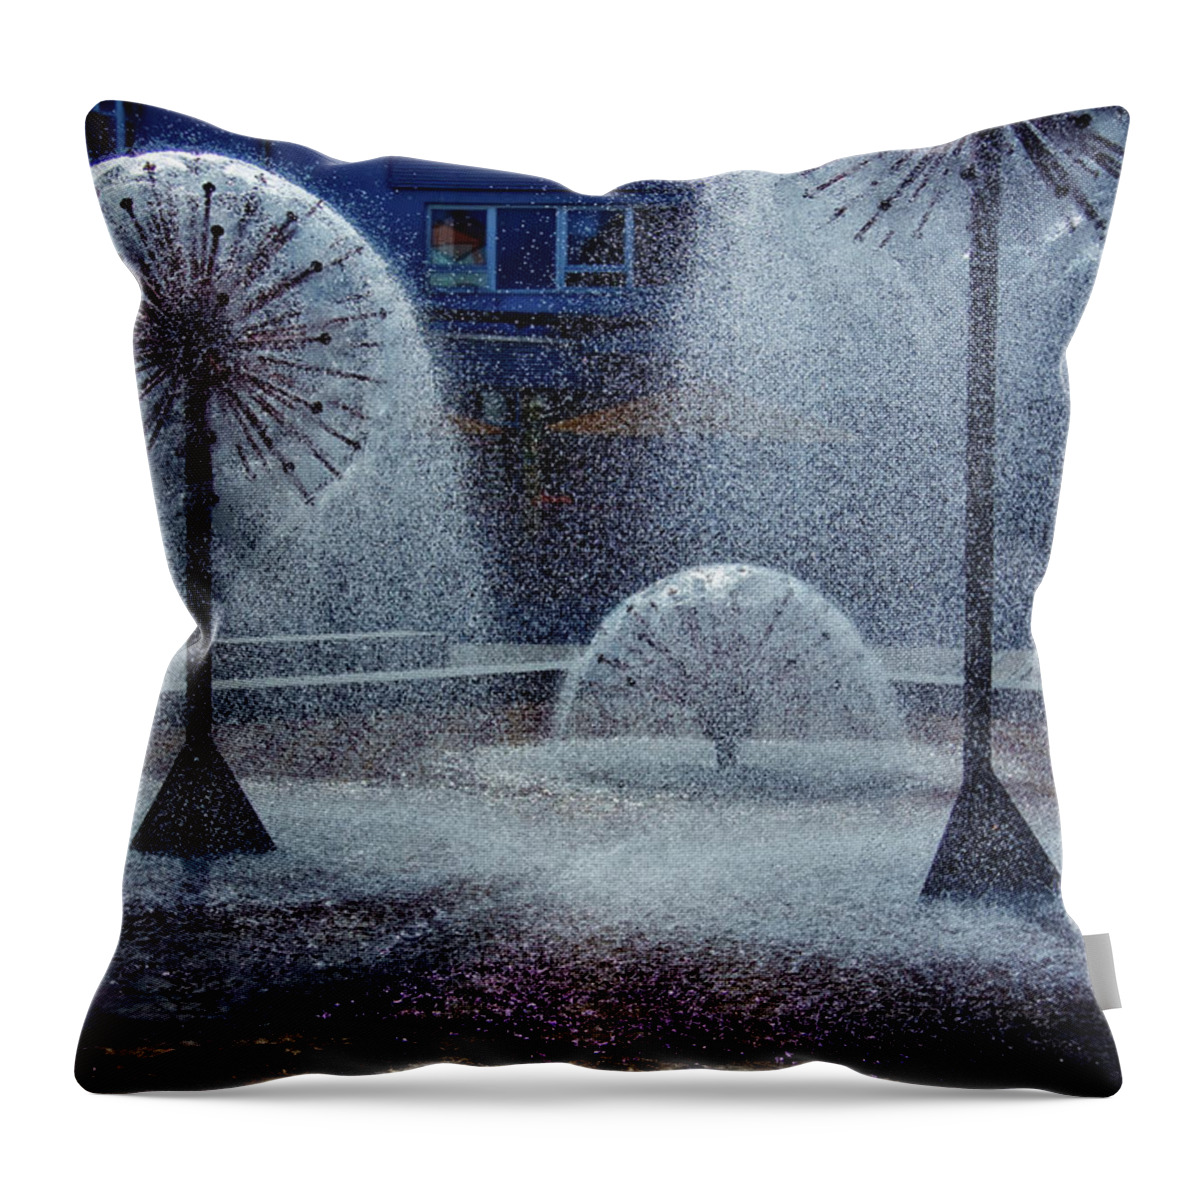 Water Fountains Throw Pillow featuring the photograph Urban Art by Tatiana Travelways